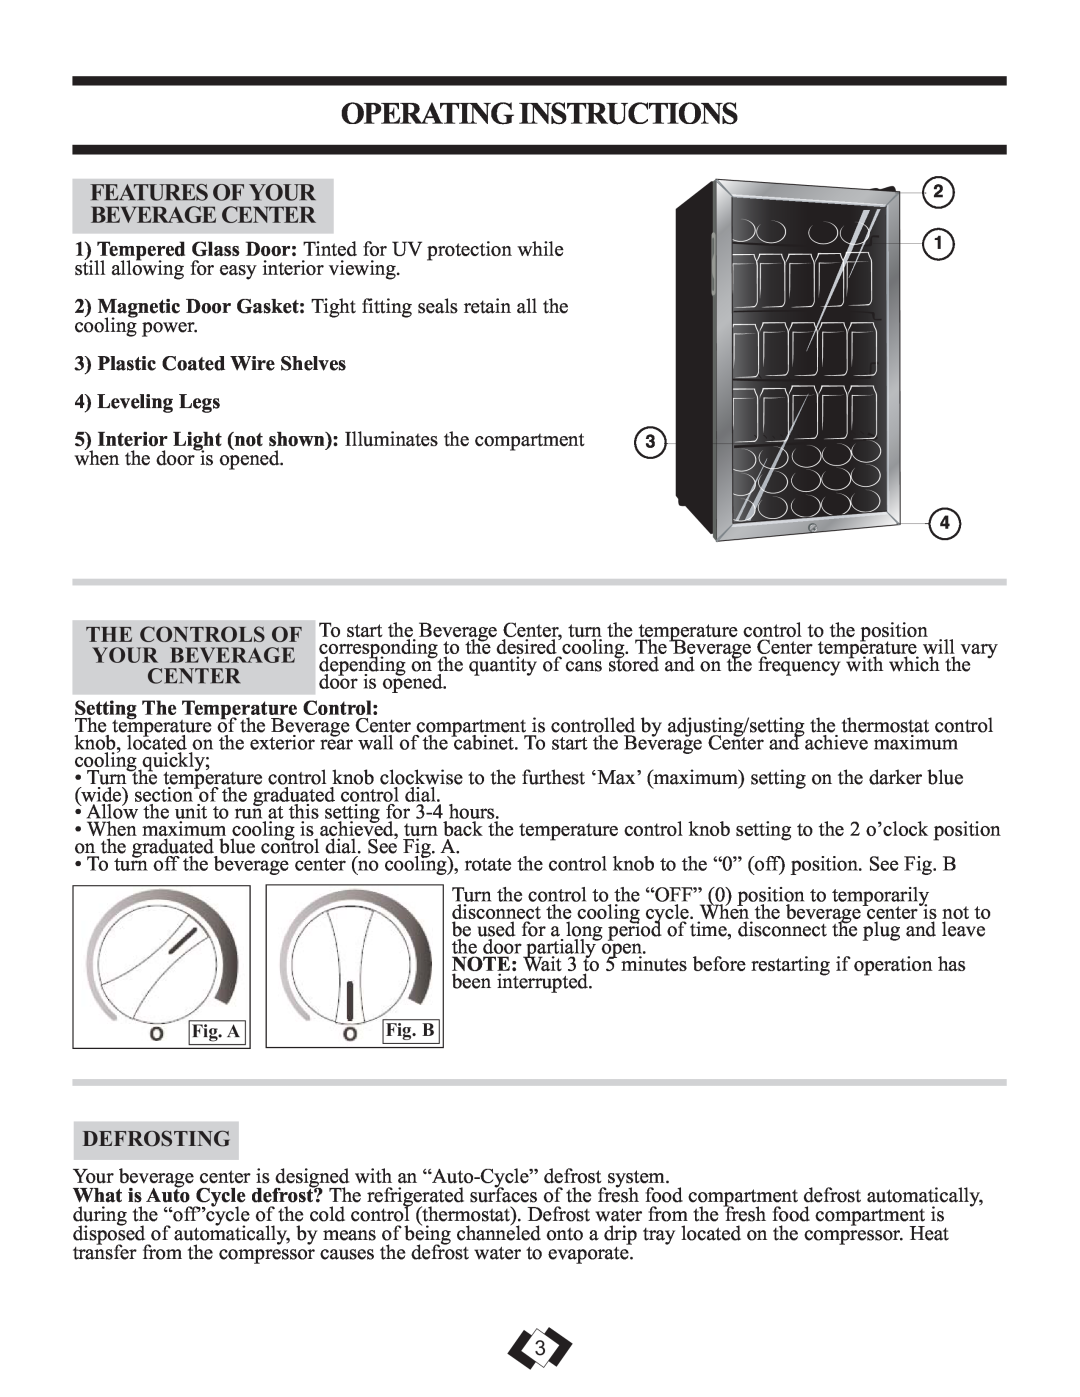 Danby DBC120BLS Operating Instructions, Features Of Your Beverage Center, The Controls Of Your Beverage Center, Defrosting 